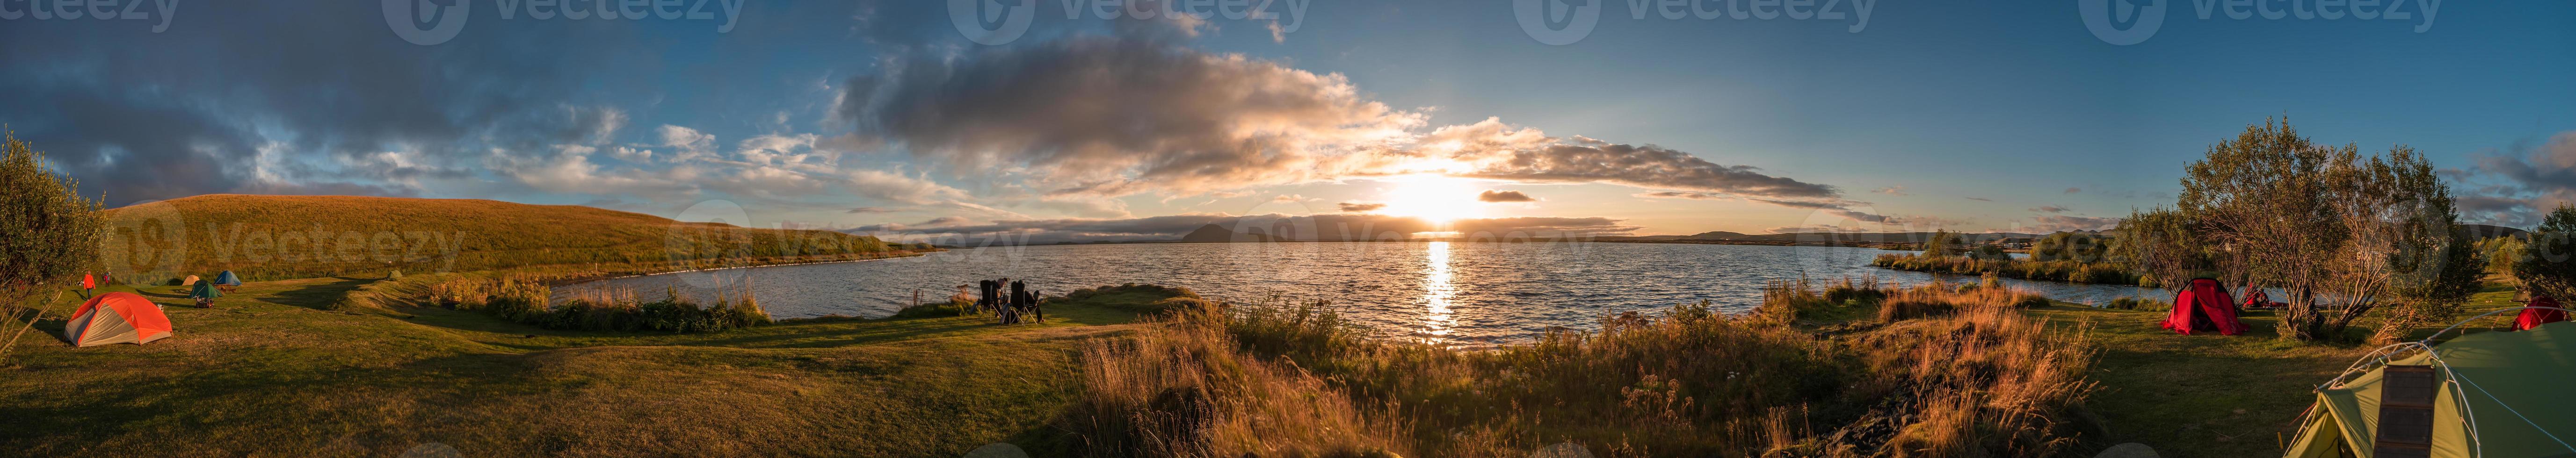 Panoramic view of lake Myvatn in Highlands of Iceland with camping tents at campsite during amazing sunset in summer, Iceland. photo